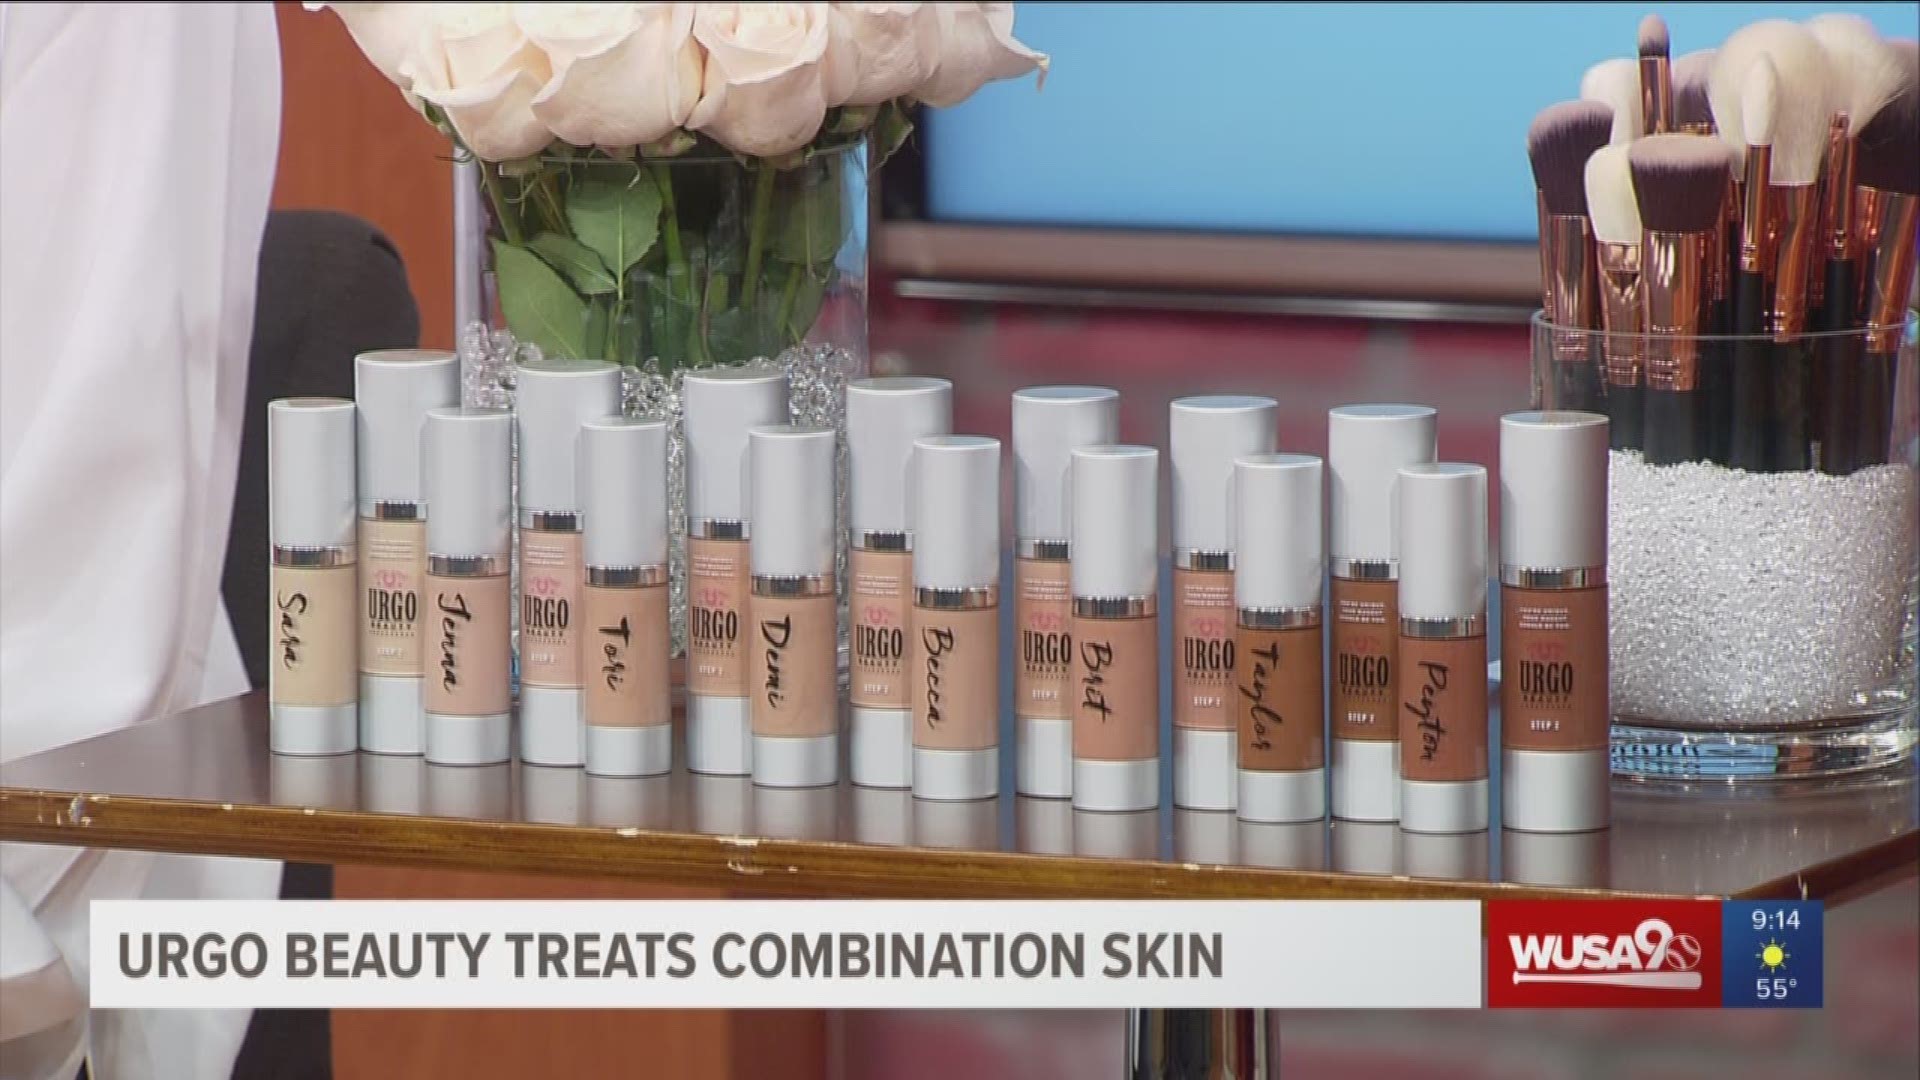 Chelsea Director, founder of URGO Beauty is here to share how your makeup can be treated just like a skincare line.